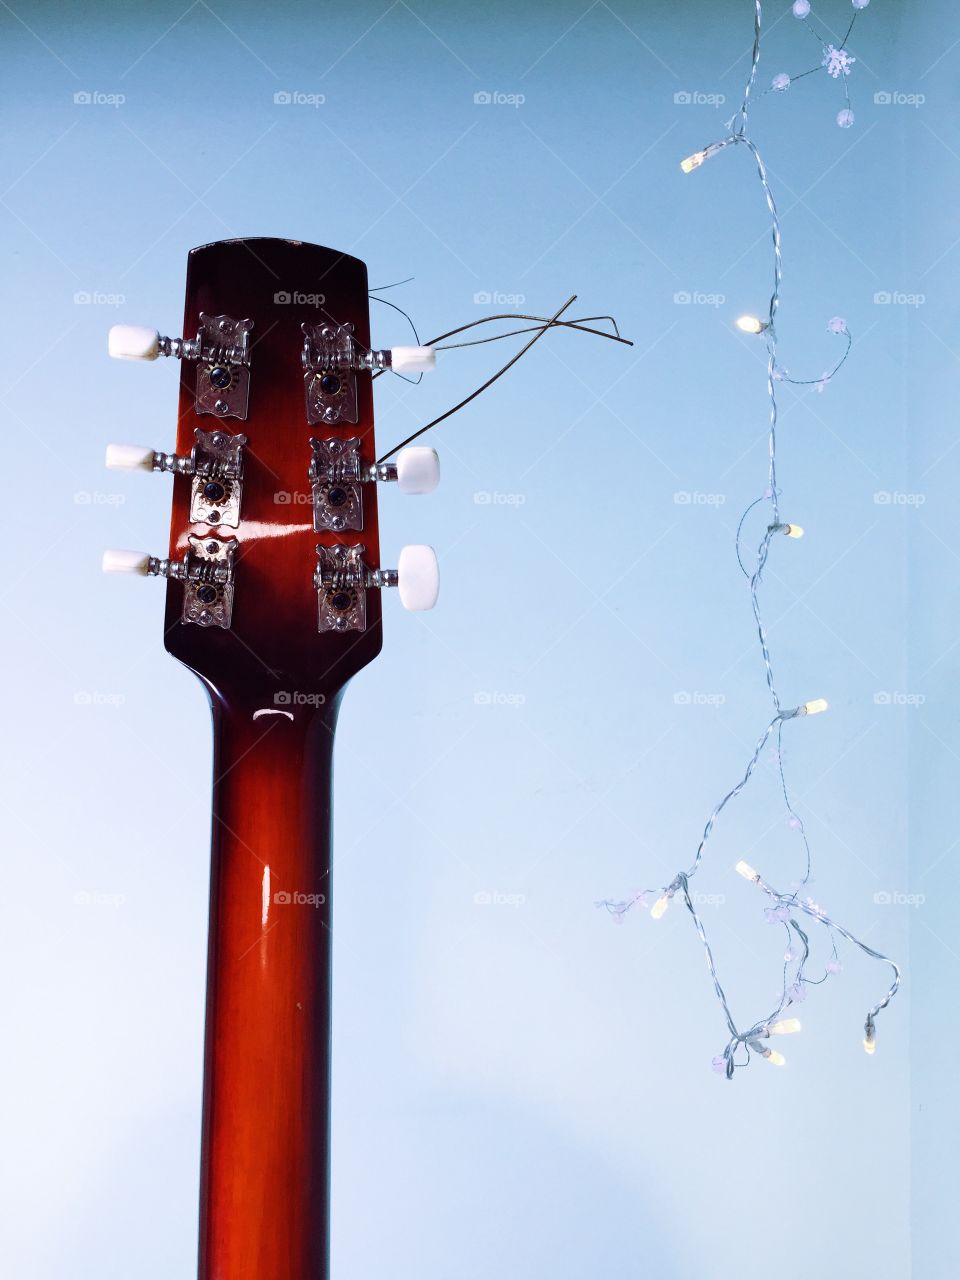 Light garland and guitar. What else is needed for a celebration 